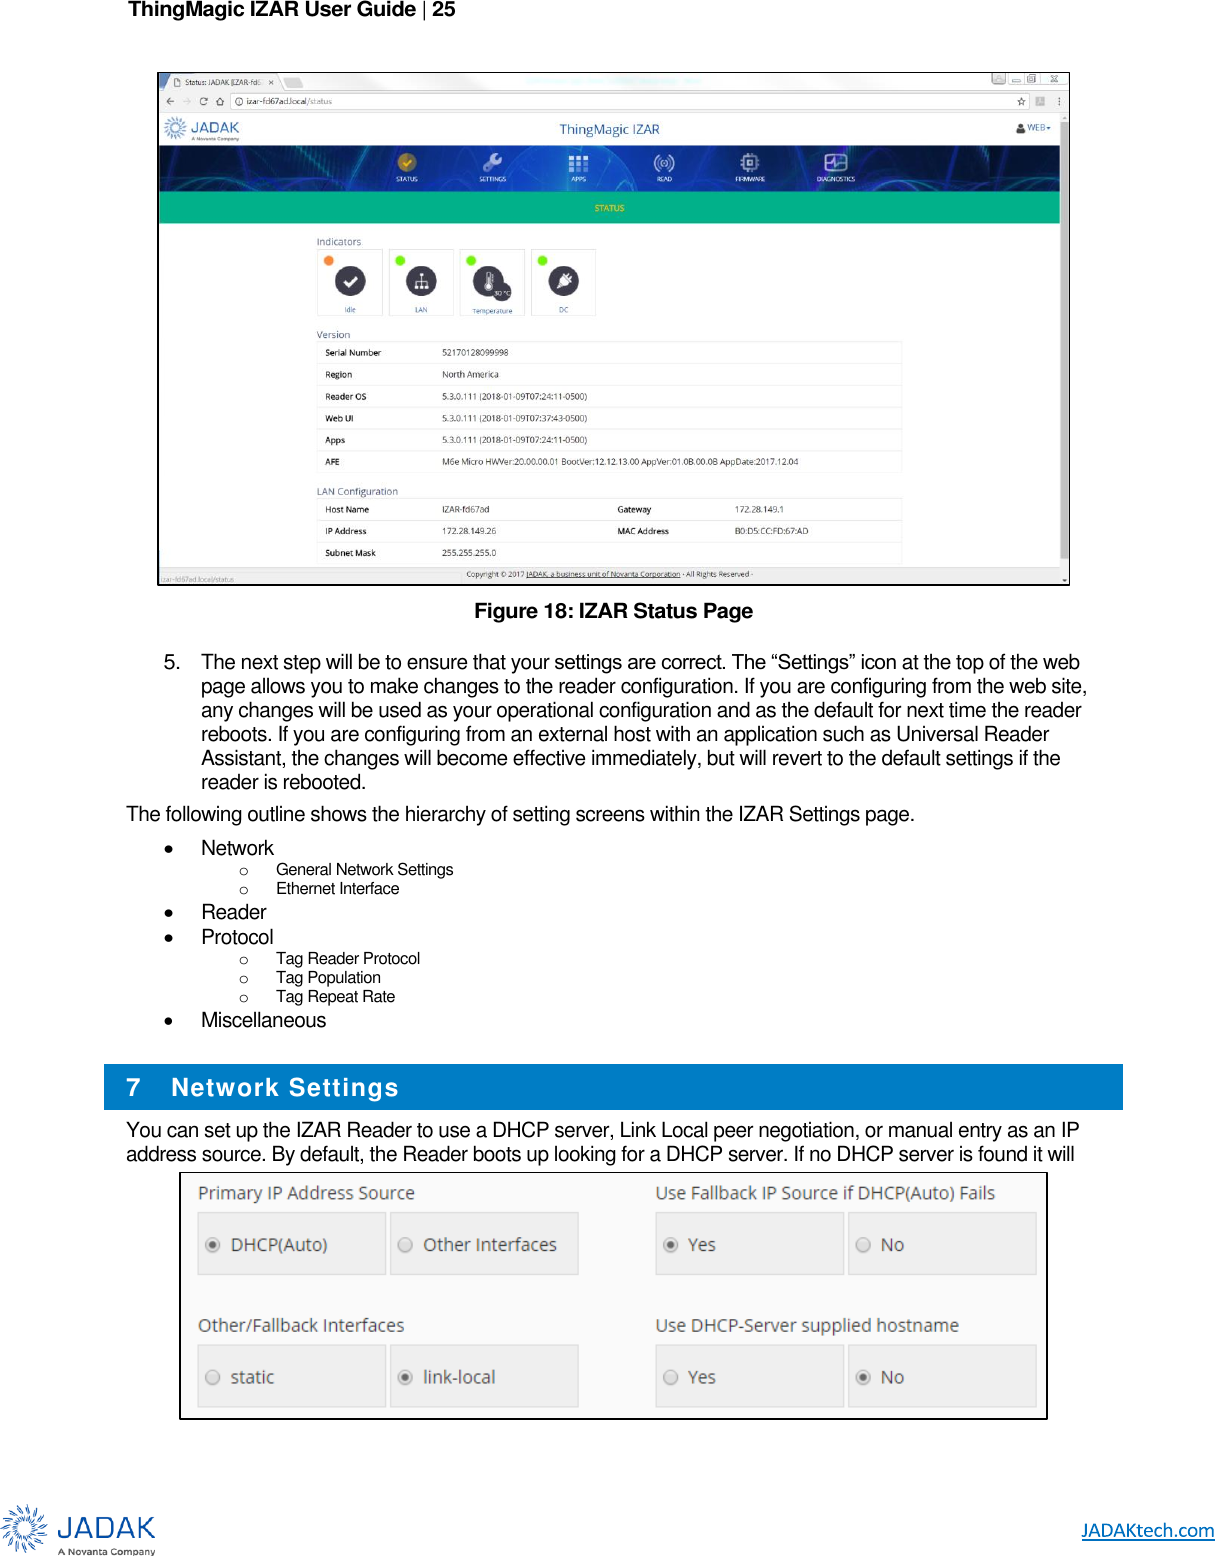 ThingMagic IZAR User Guide | 25       Figure 18: IZAR Status Page  5. The next step will be to ensure that your settings are correct. The “Settings” icon at the top of the web page allows you to make changes to the reader configuration. If you are configuring from the web site, any changes will be used as your operational configuration and as the default for next time the reader reboots. If you are configuring from an external host with an application such as Universal Reader Assistant, the changes will become effective immediately, but will revert to the default settings if the reader is rebooted. The following outline shows the hierarchy of setting screens within the IZAR Settings page.  Network o General Network Settings o Ethernet Interface  Reader  Protocol o Tag Reader Protocol o Tag Population o Tag Repeat Rate    Miscellaneous  7 Network Settings You can set up the IZAR Reader to use a DHCP server, Link Local peer negotiation, or manual entry as an IP address source. By default, the Reader boots up looking for a DHCP server. If no DHCP server is found it will 